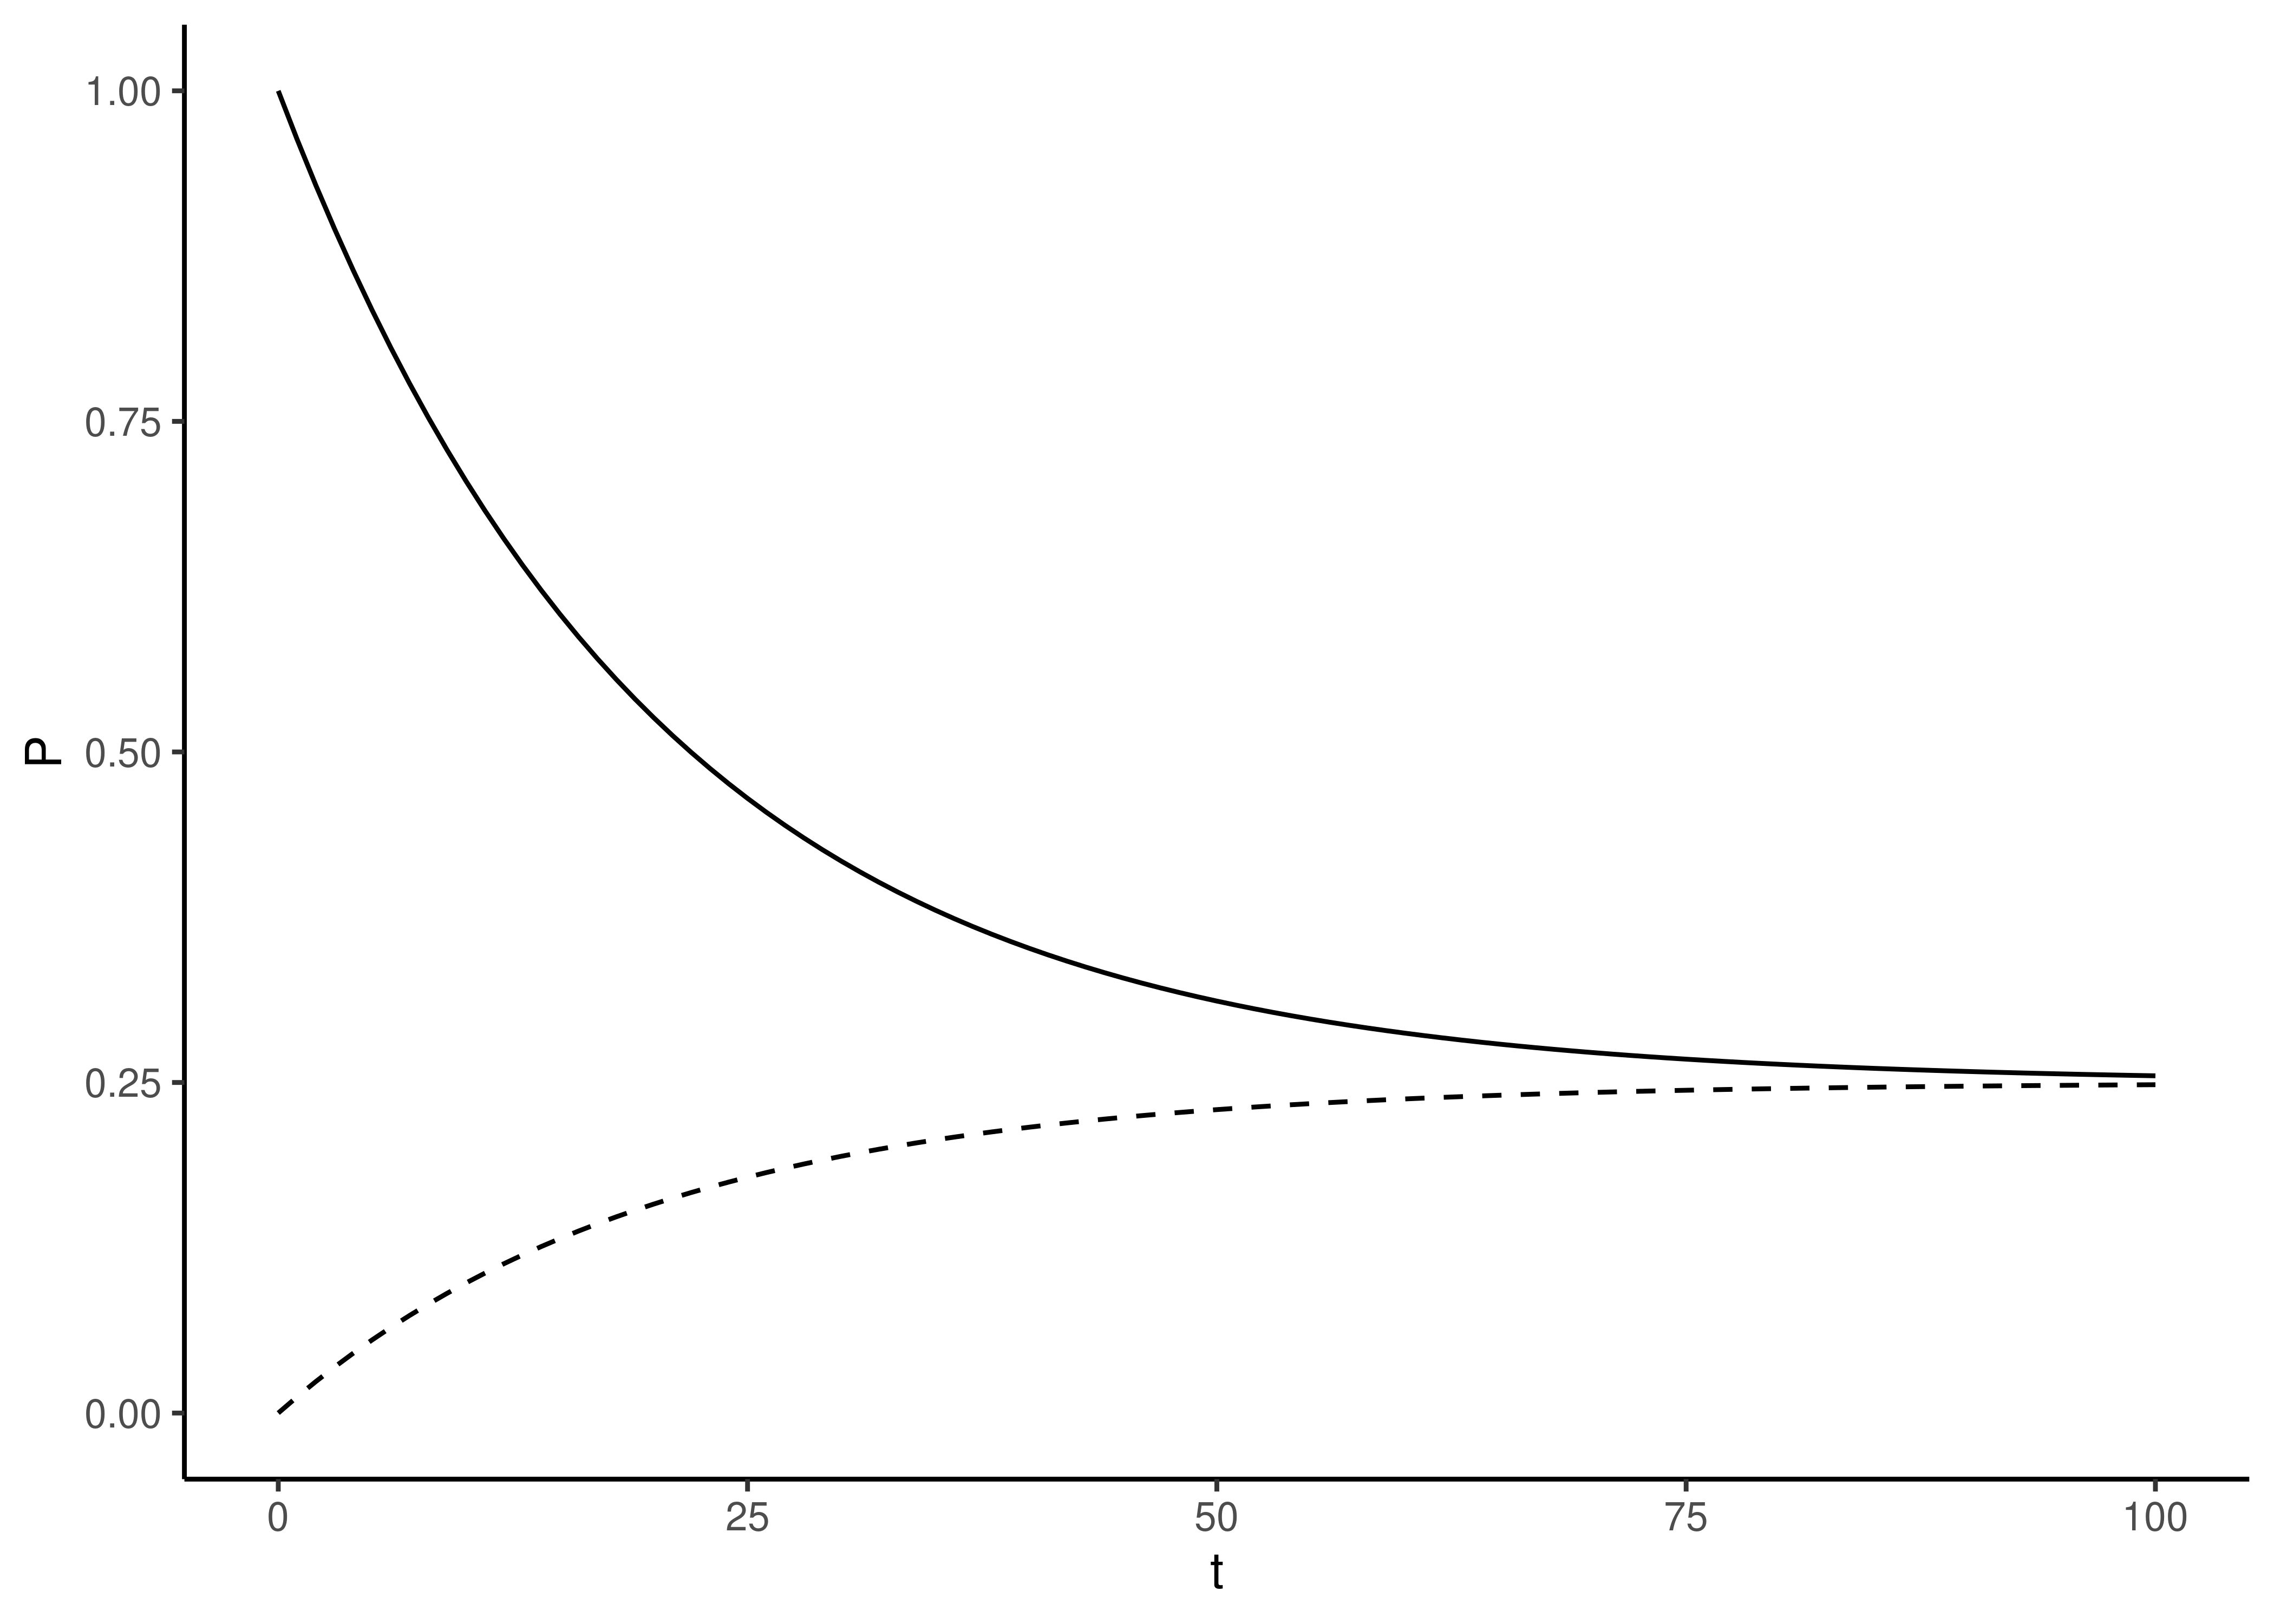 The probability of observing a particular end state at time $t$, given the start state A and $\mu=0.05$. The solid line is the probability of observing the original start state (as described by Equation \@ref(eq:sim-stay)), the dashed line is the probability of observing each of the three other states (as described by Equation \@ref(eq:sim-change)).